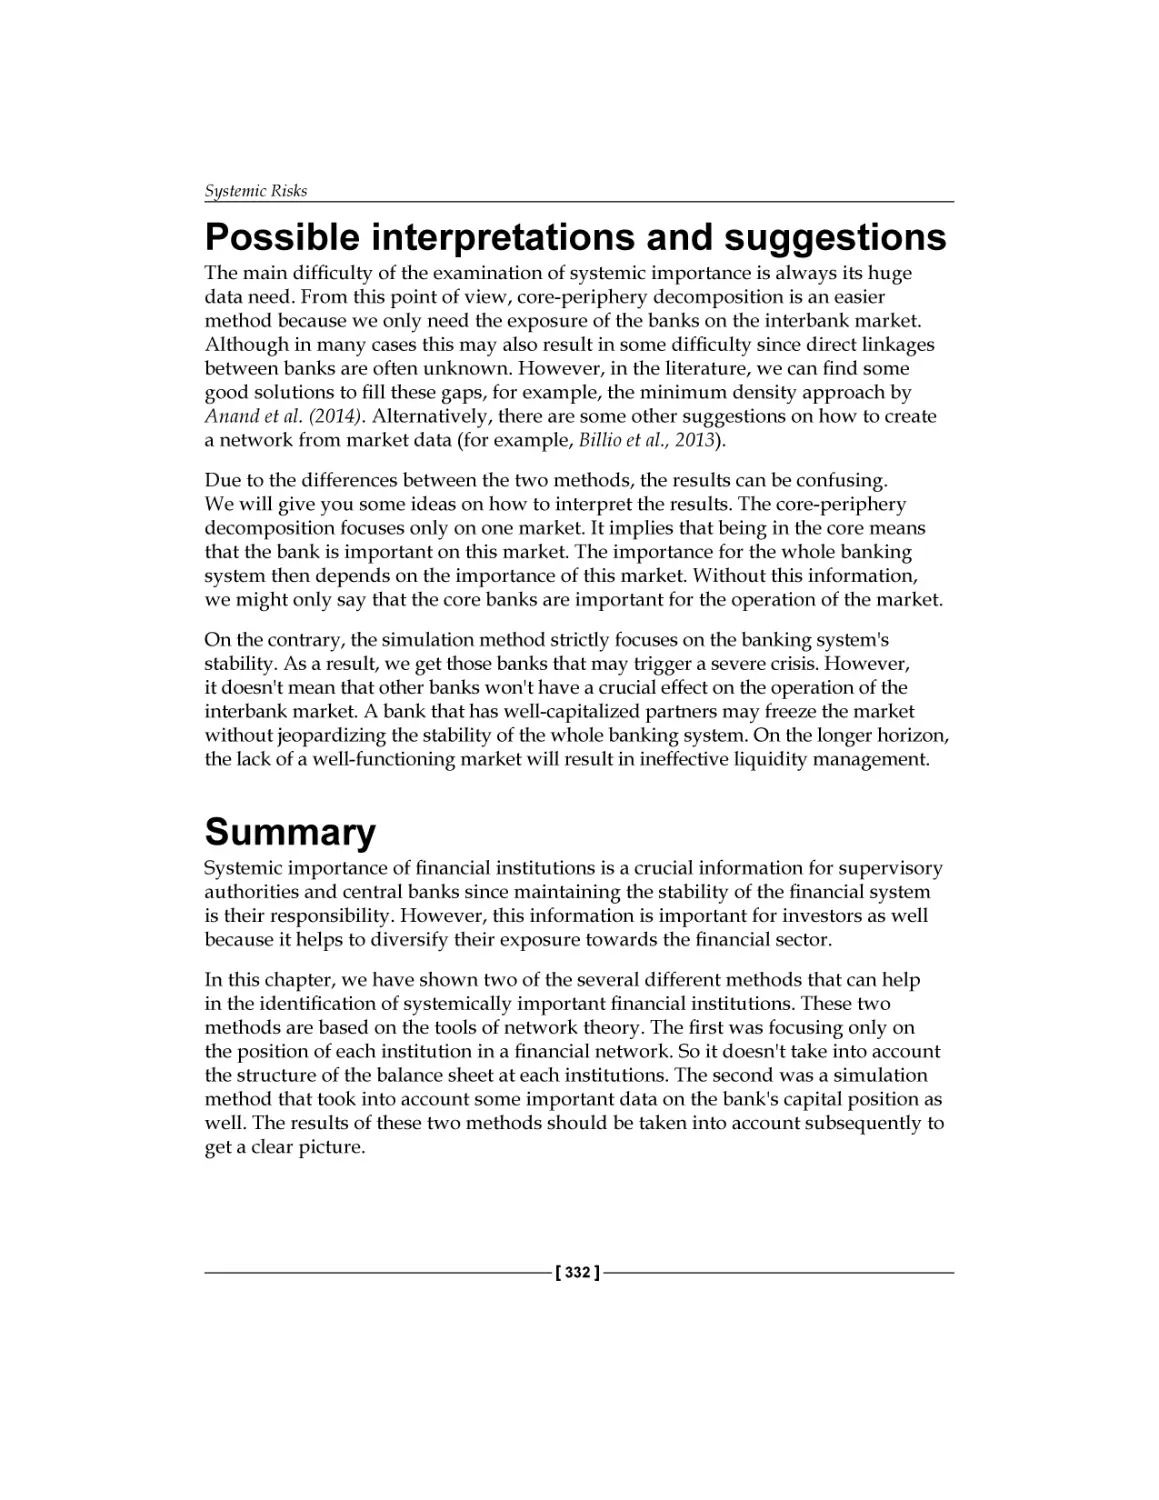 Possible interpretations and suggestions
Summary